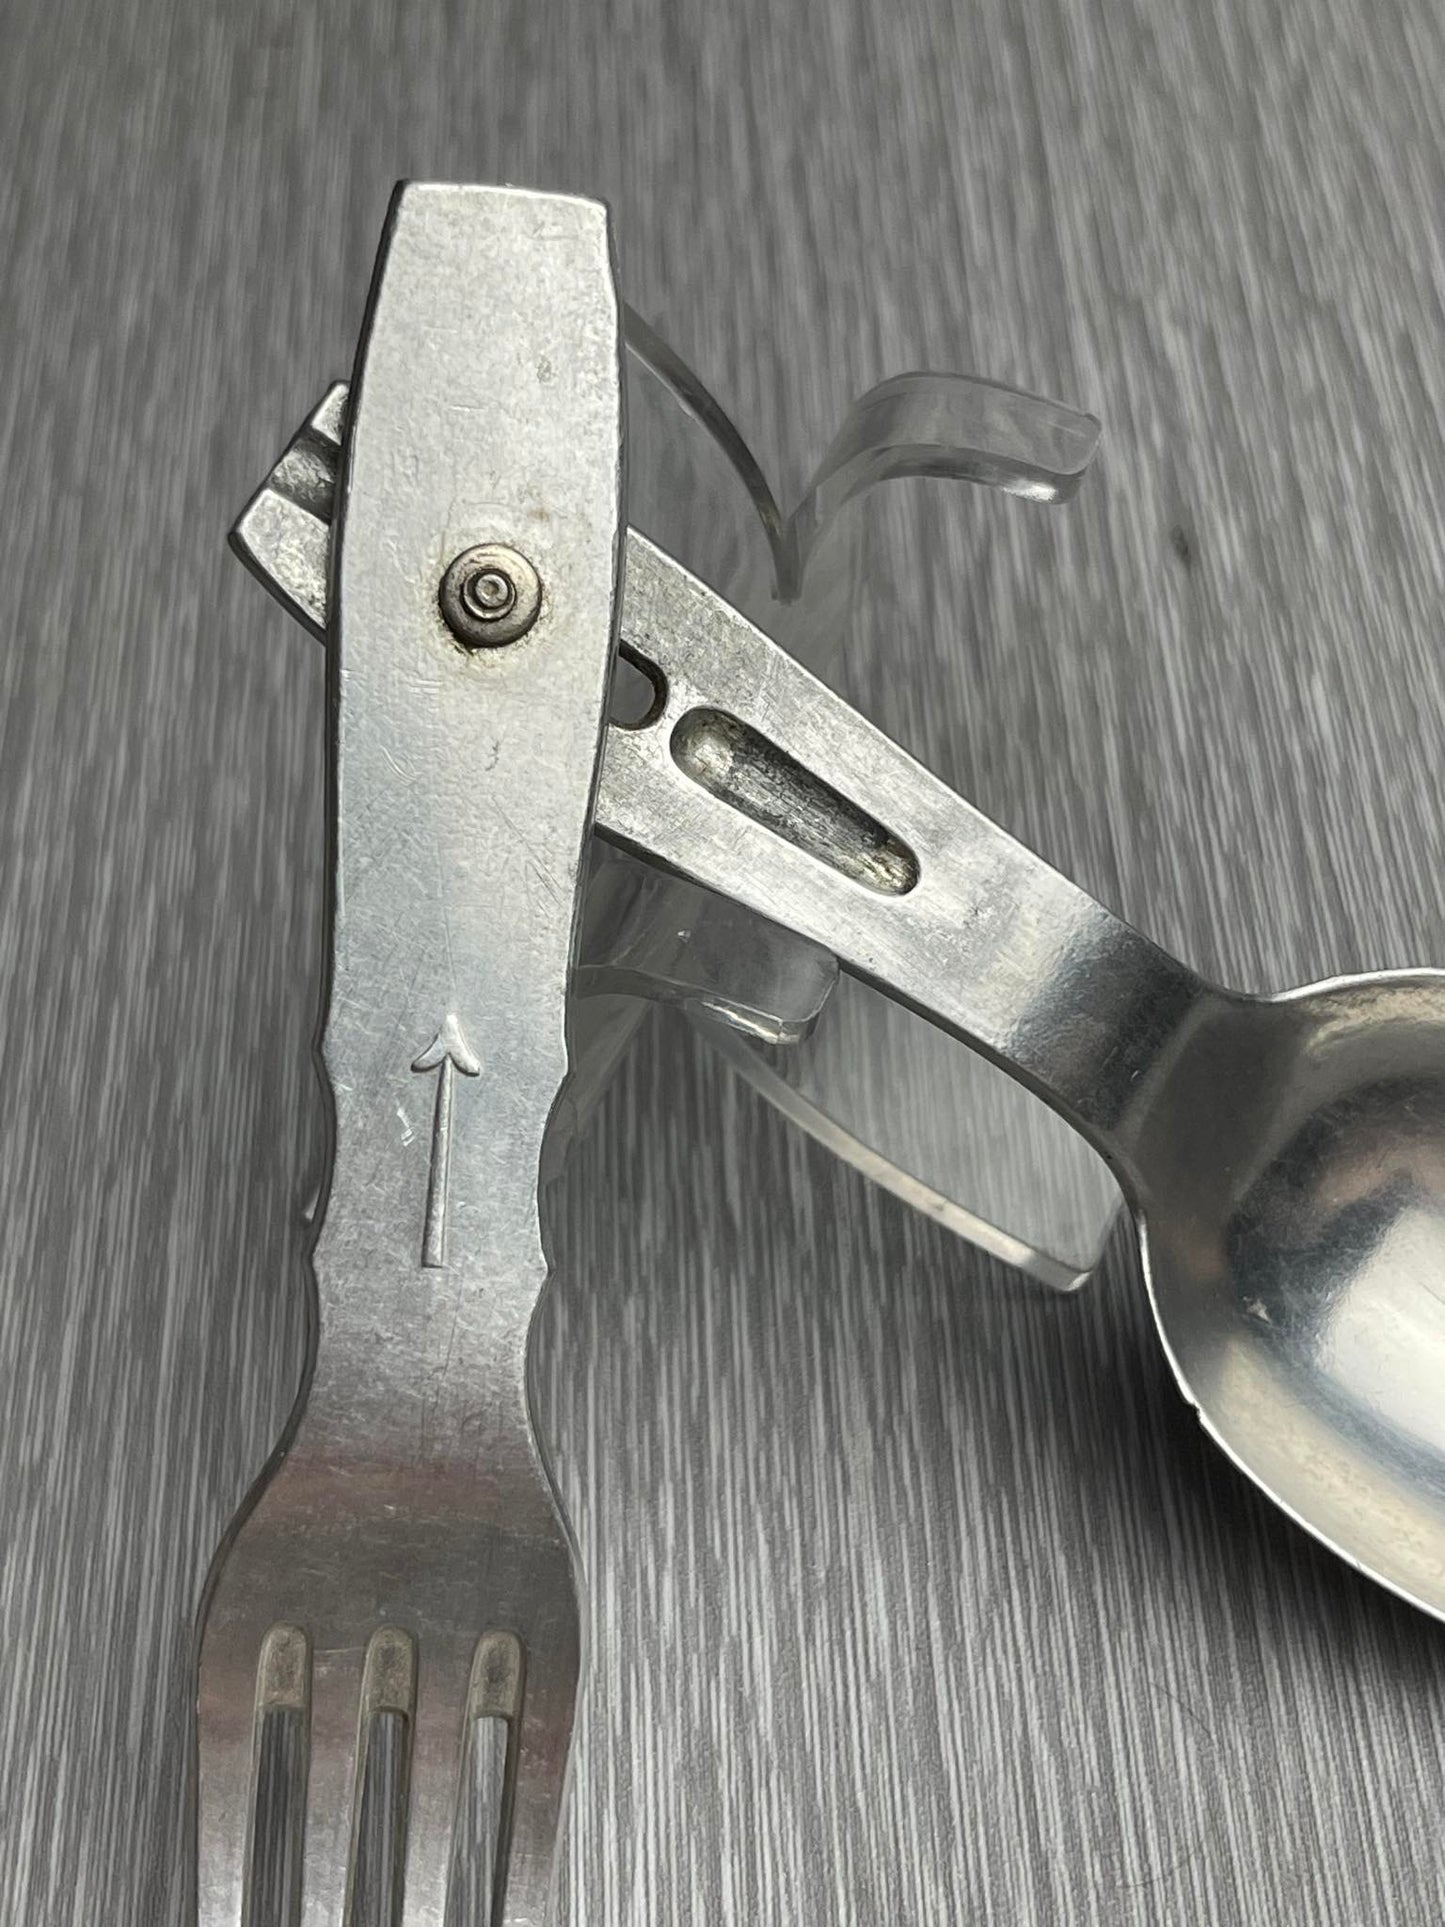 GERMAN WW2 EXPERIMENTAL UTENSILS BY WSuCL